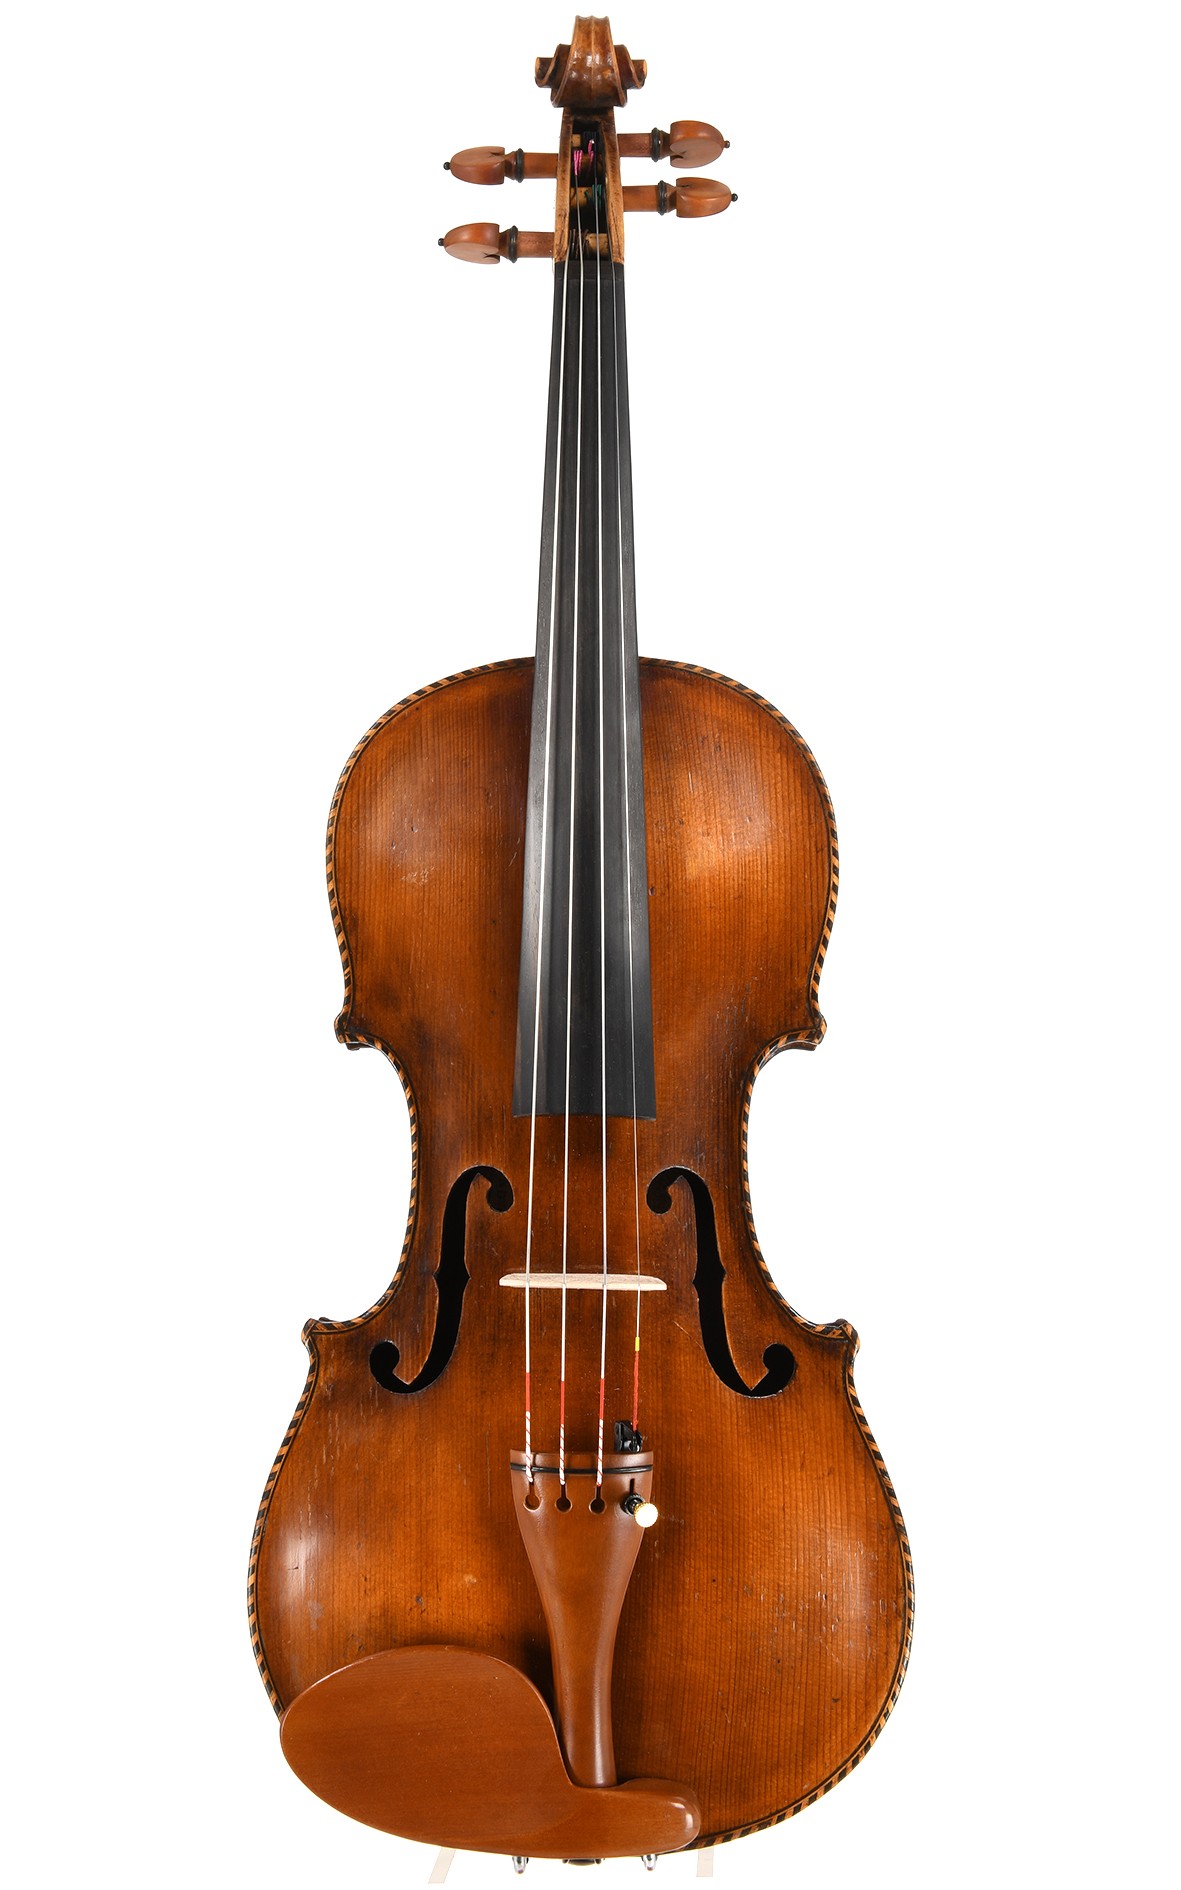 Antique violin from Saxony, c.1920